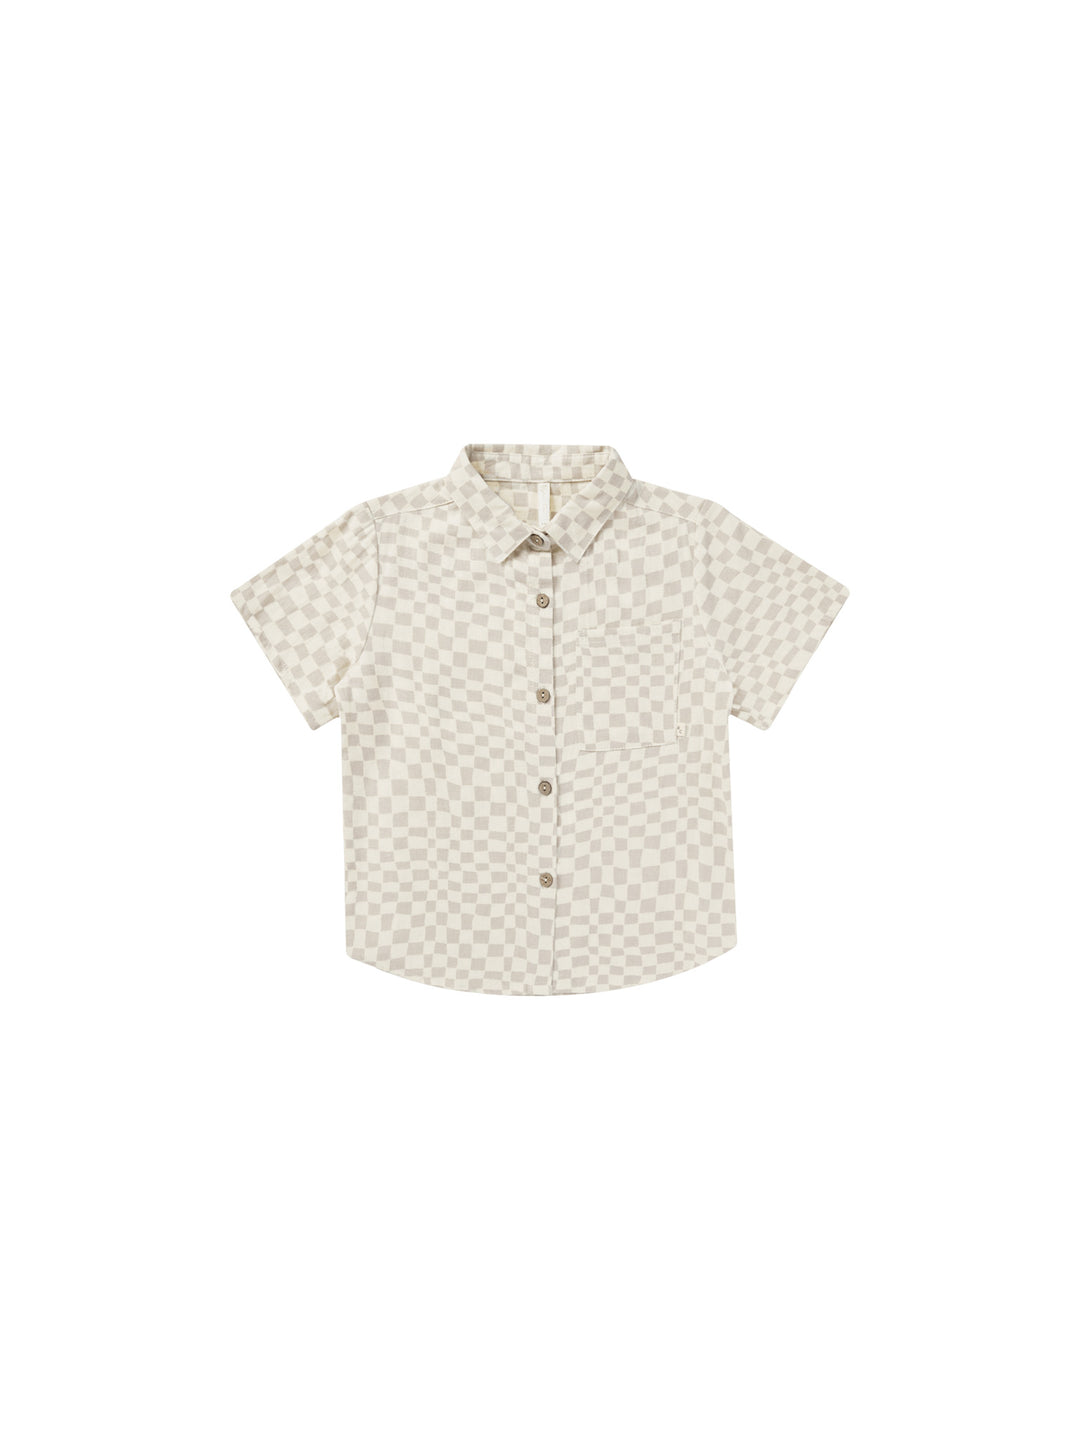 Dove Check Collared S/S Shirt